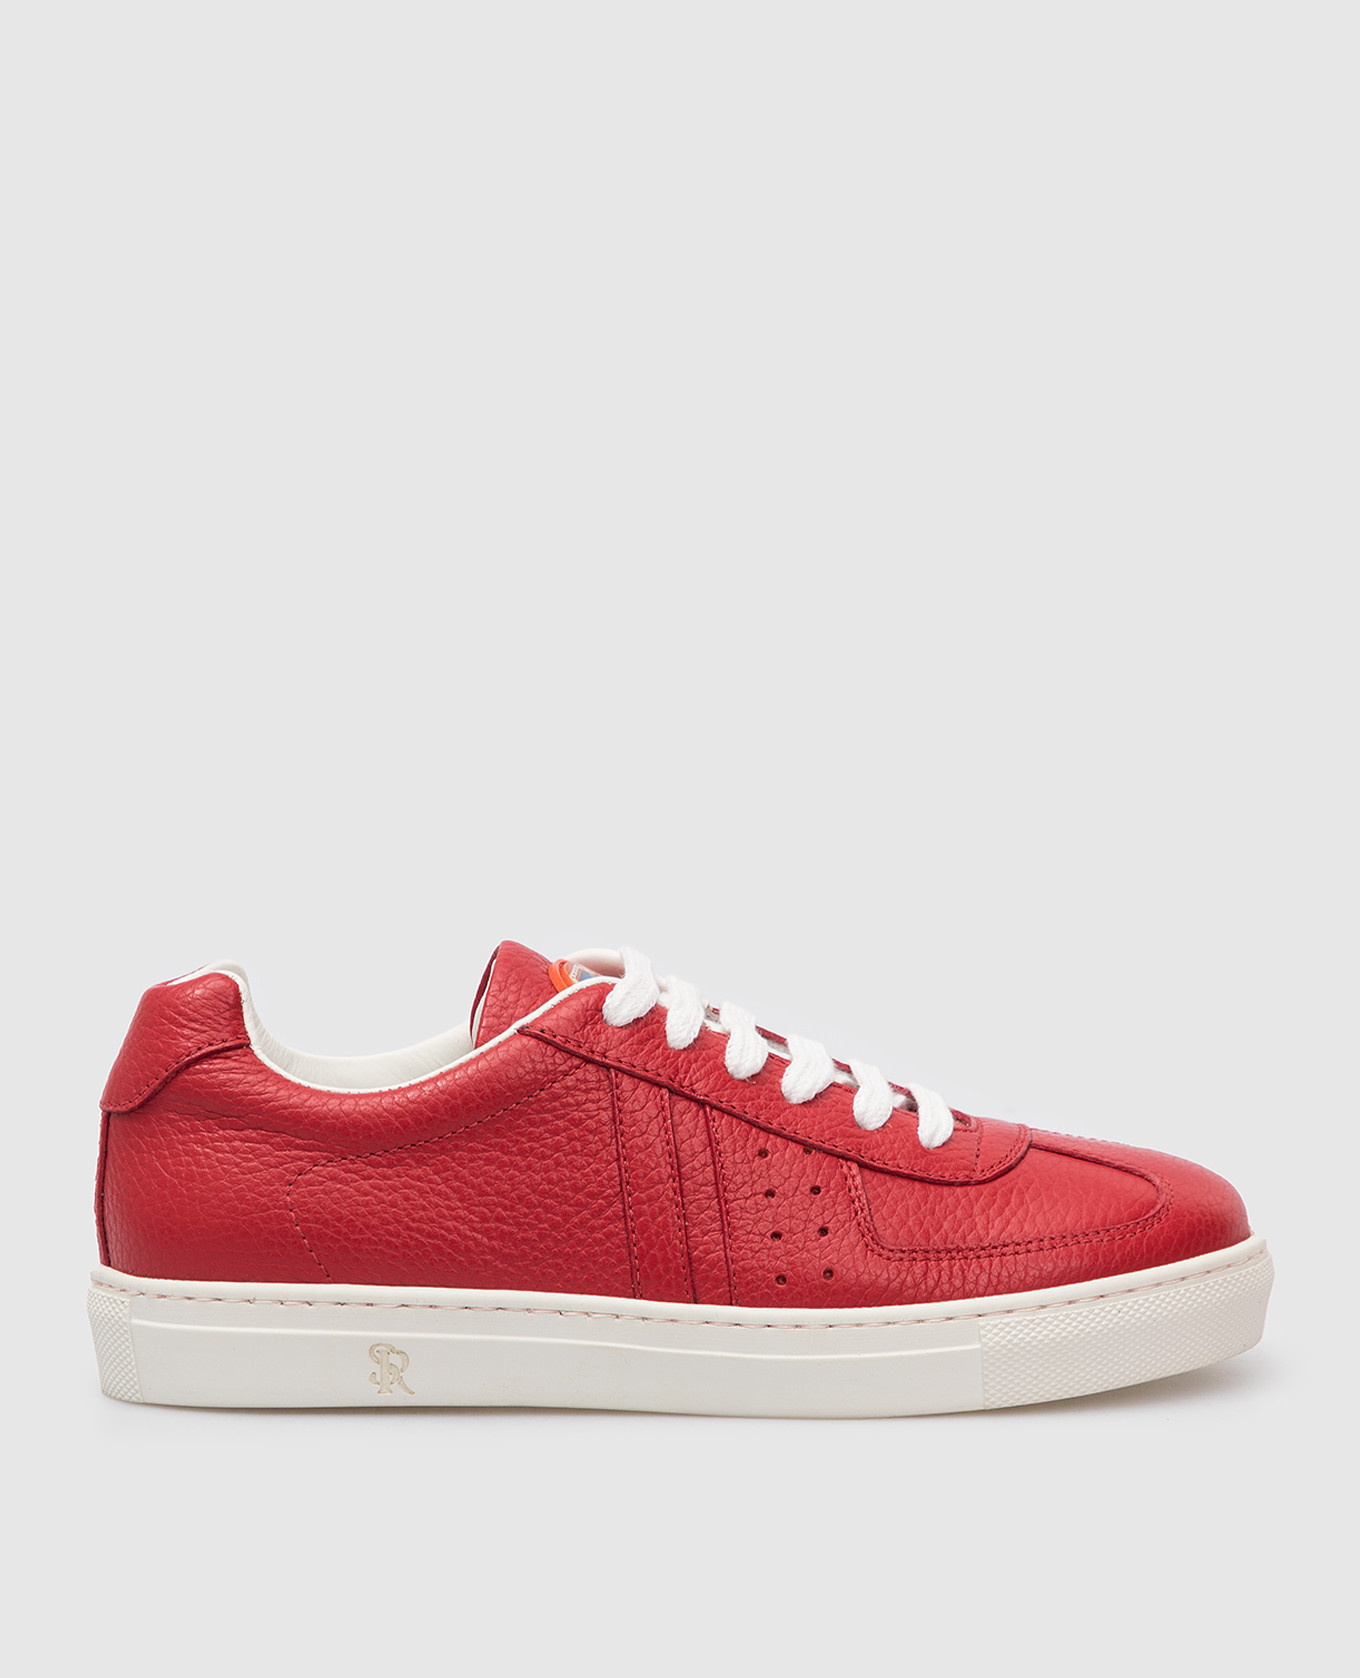 Children's red leather sneakers